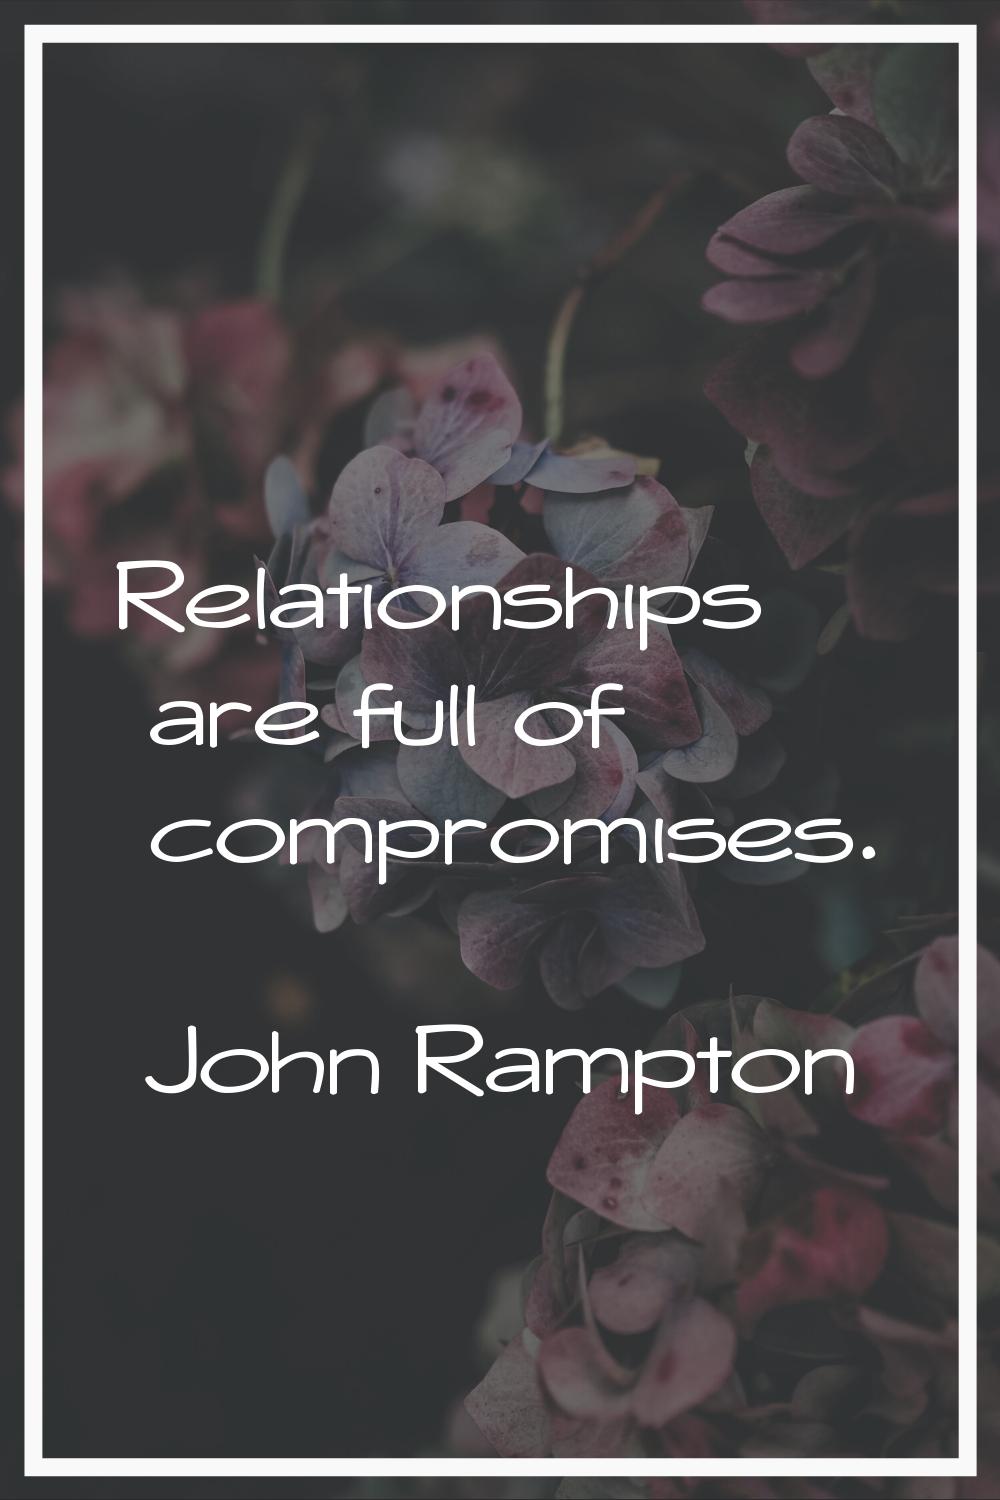 Relationships are full of compromises.